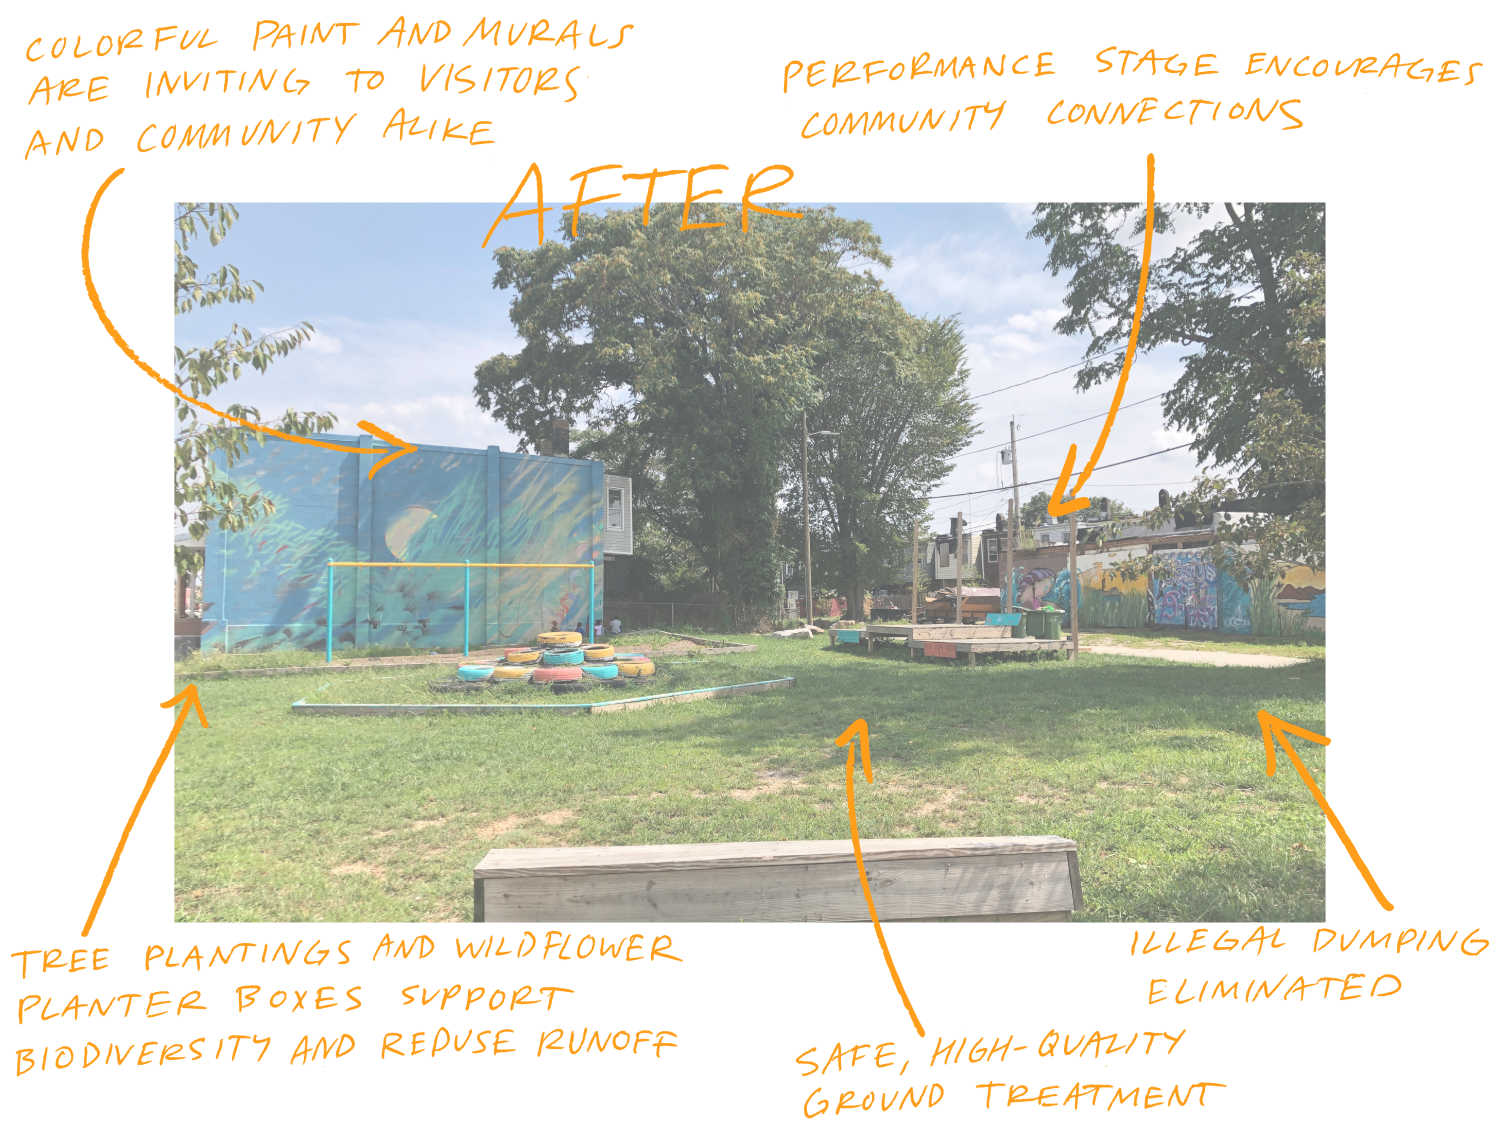 After: Colorful paint and murals are inviting to visitor and community alike, performance stage encourages community connections, tree plantings and wildflower planter boxes support biodiversity and reduce runoff, illegal dumping eliminated, safe, high-quality ground treatment. 